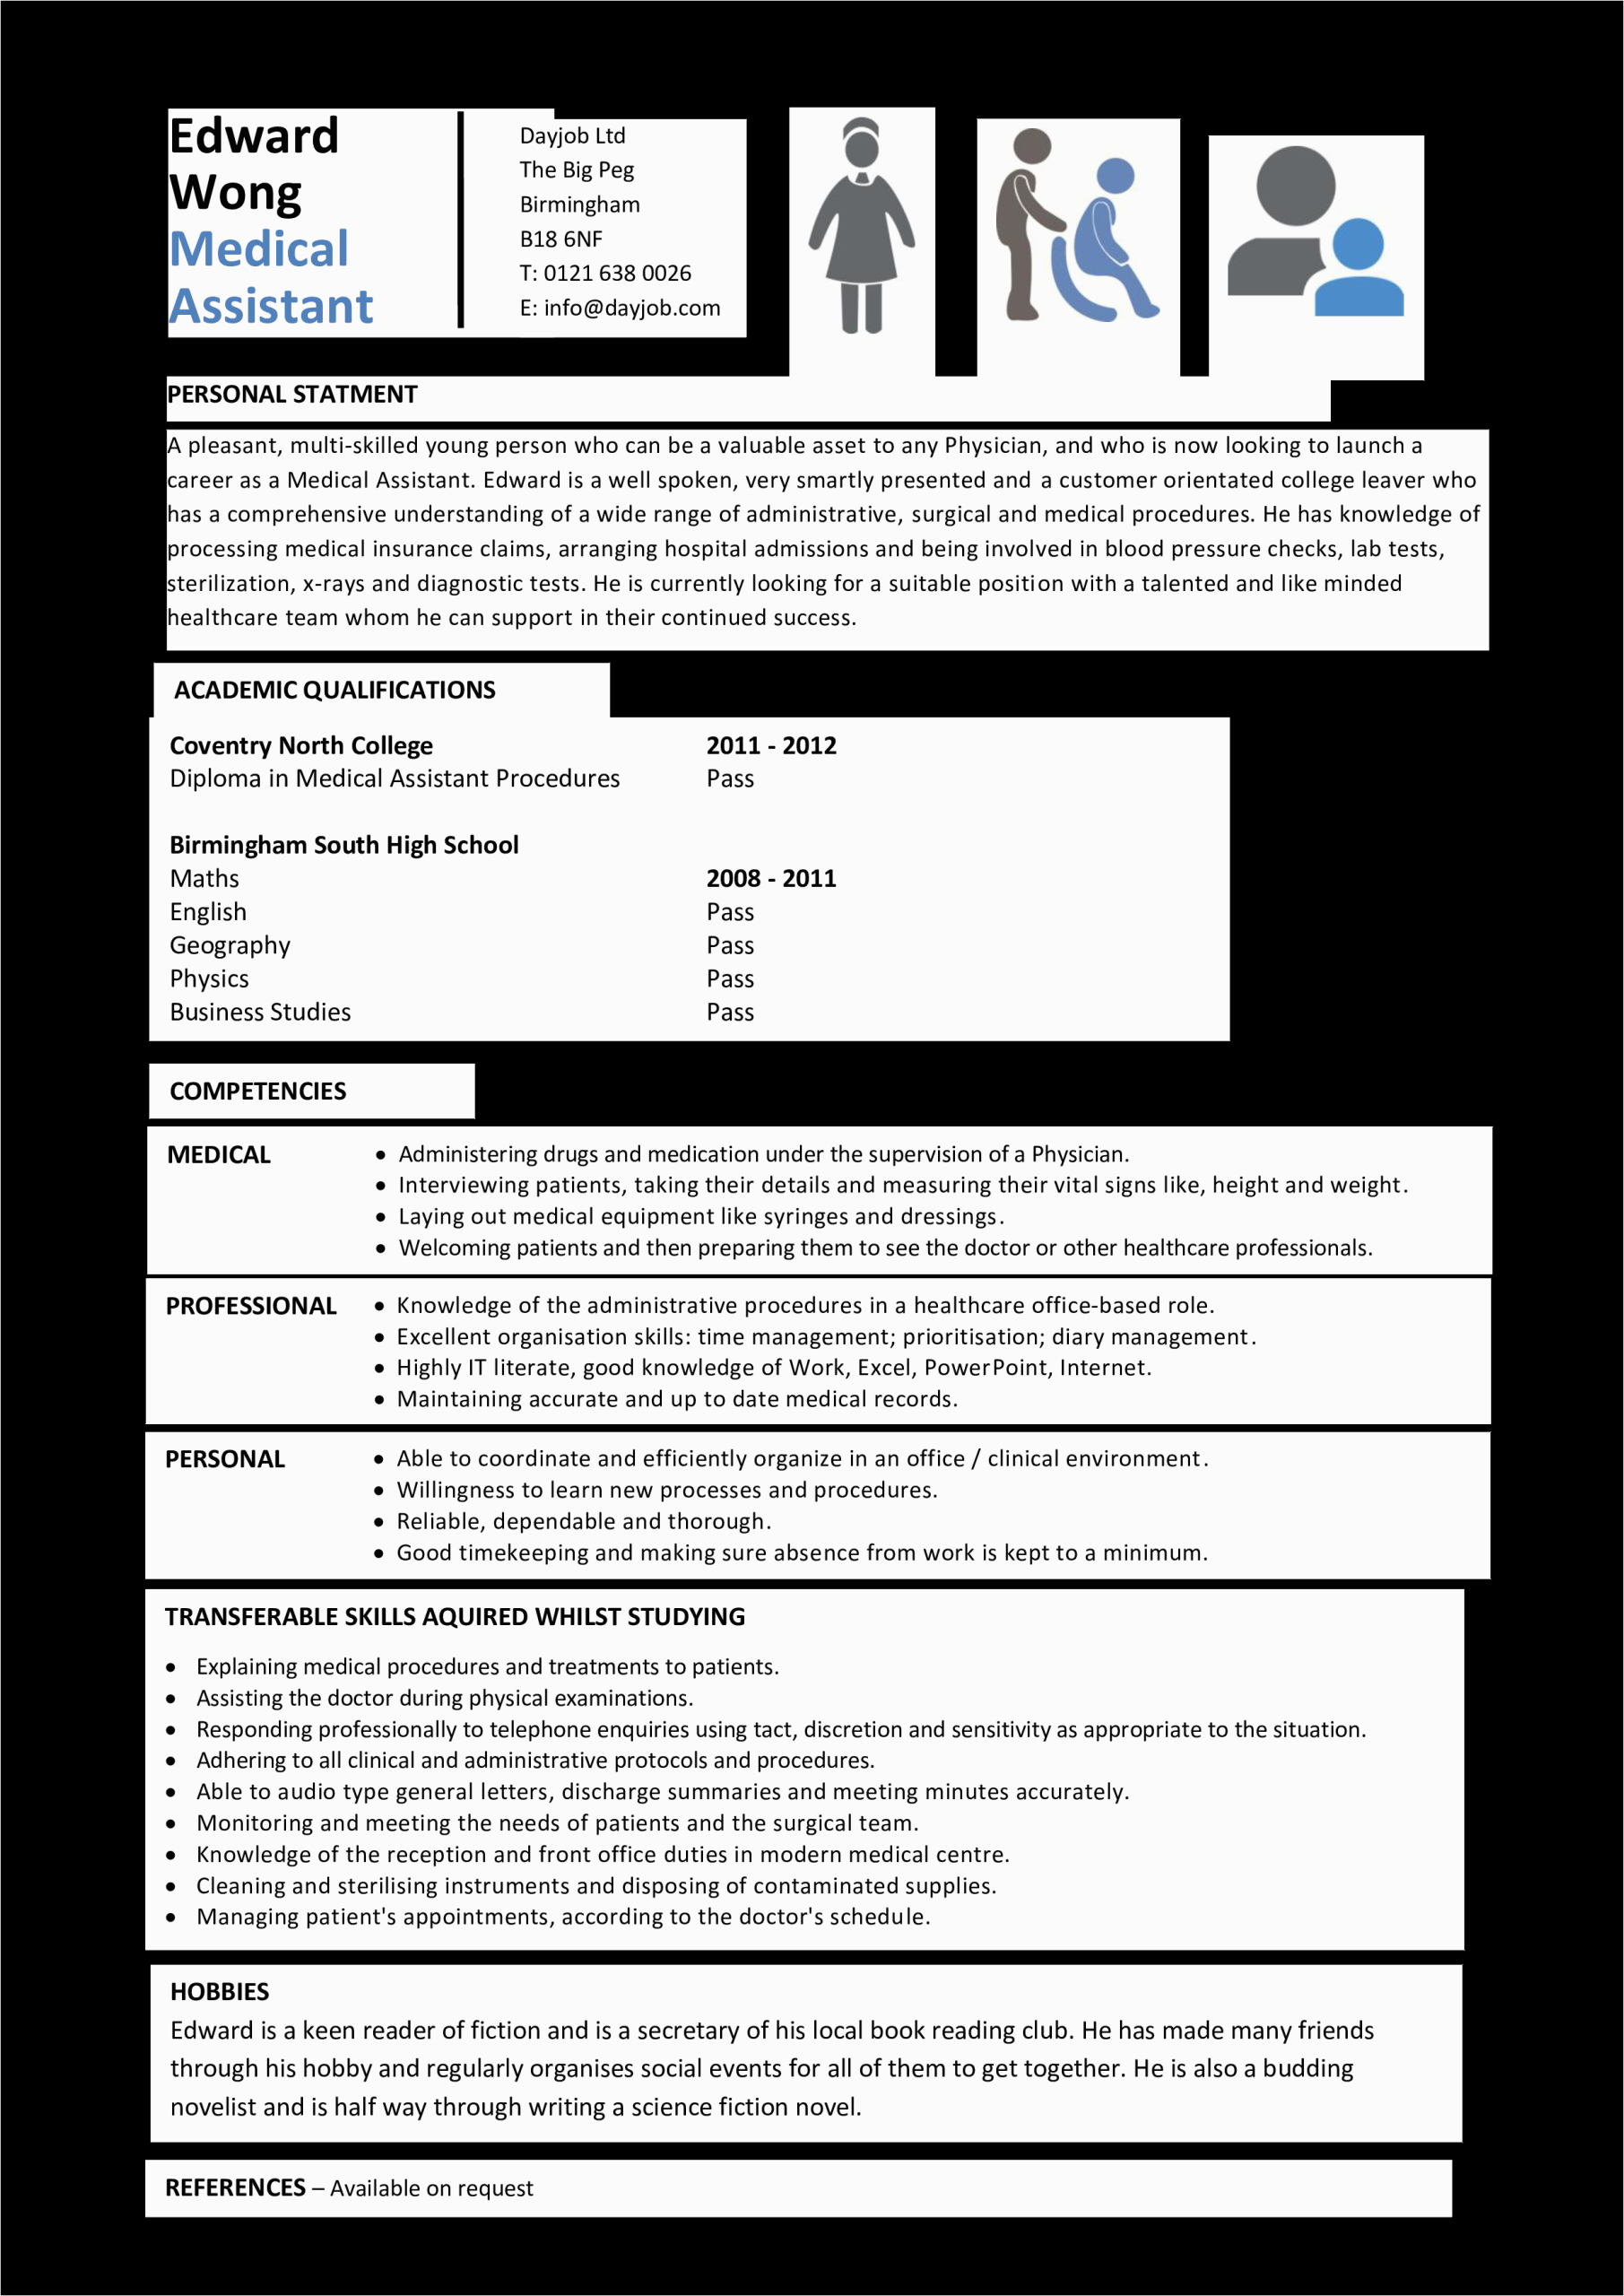 Sample Resume for Medical assistant Job with No Experience Sales assistant Cv Example No Experience Free Sales assistant Cv